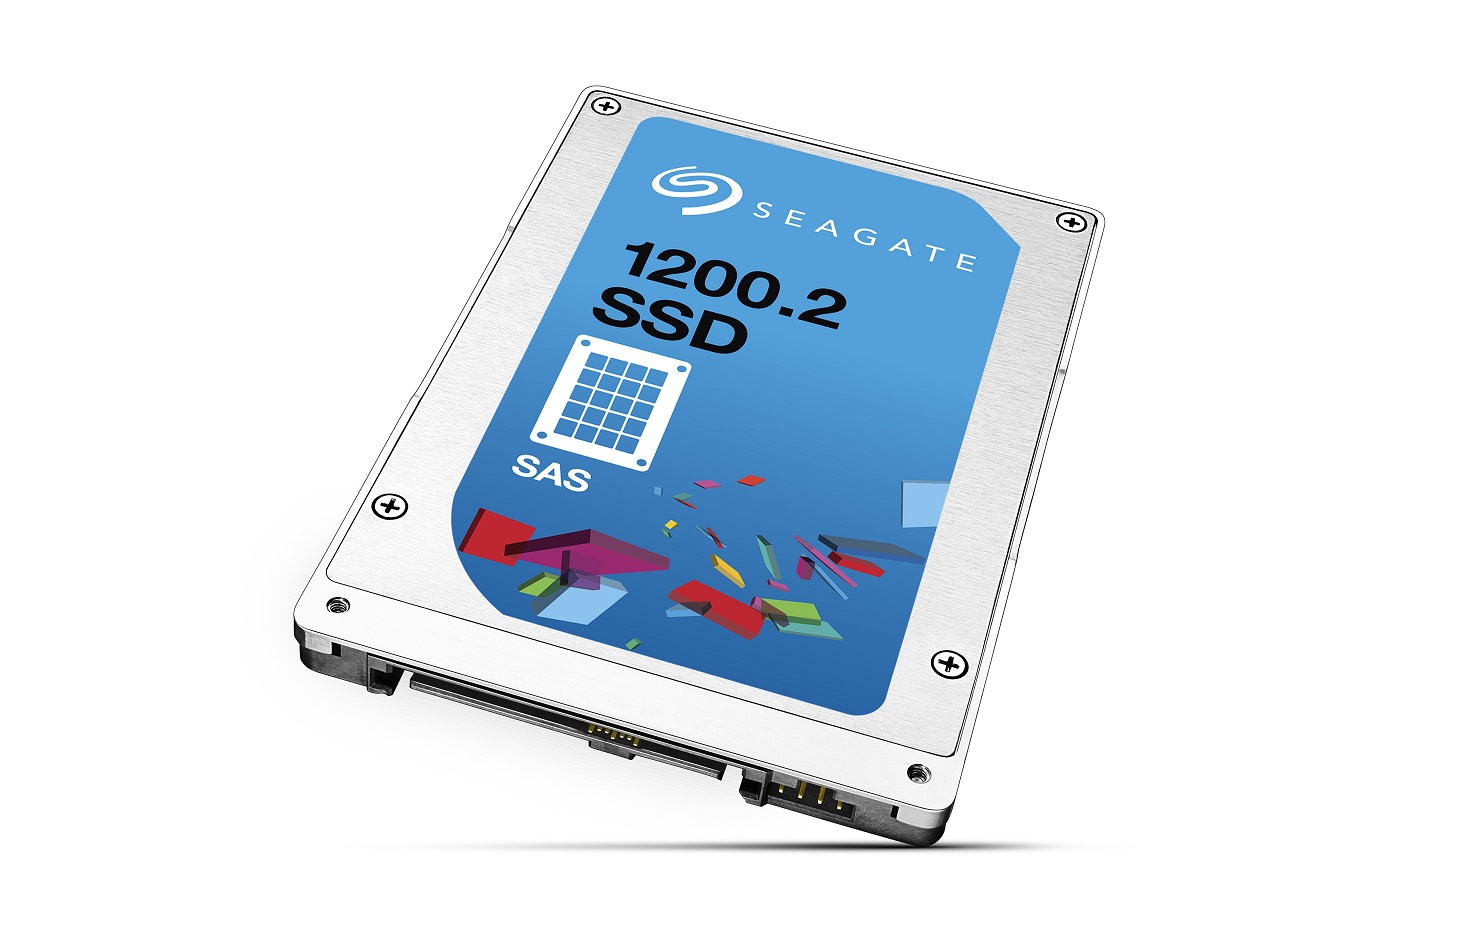 Seagate, Micron Jointly Launch S1200.2, S600DC Series SAS DataCenter SSDs